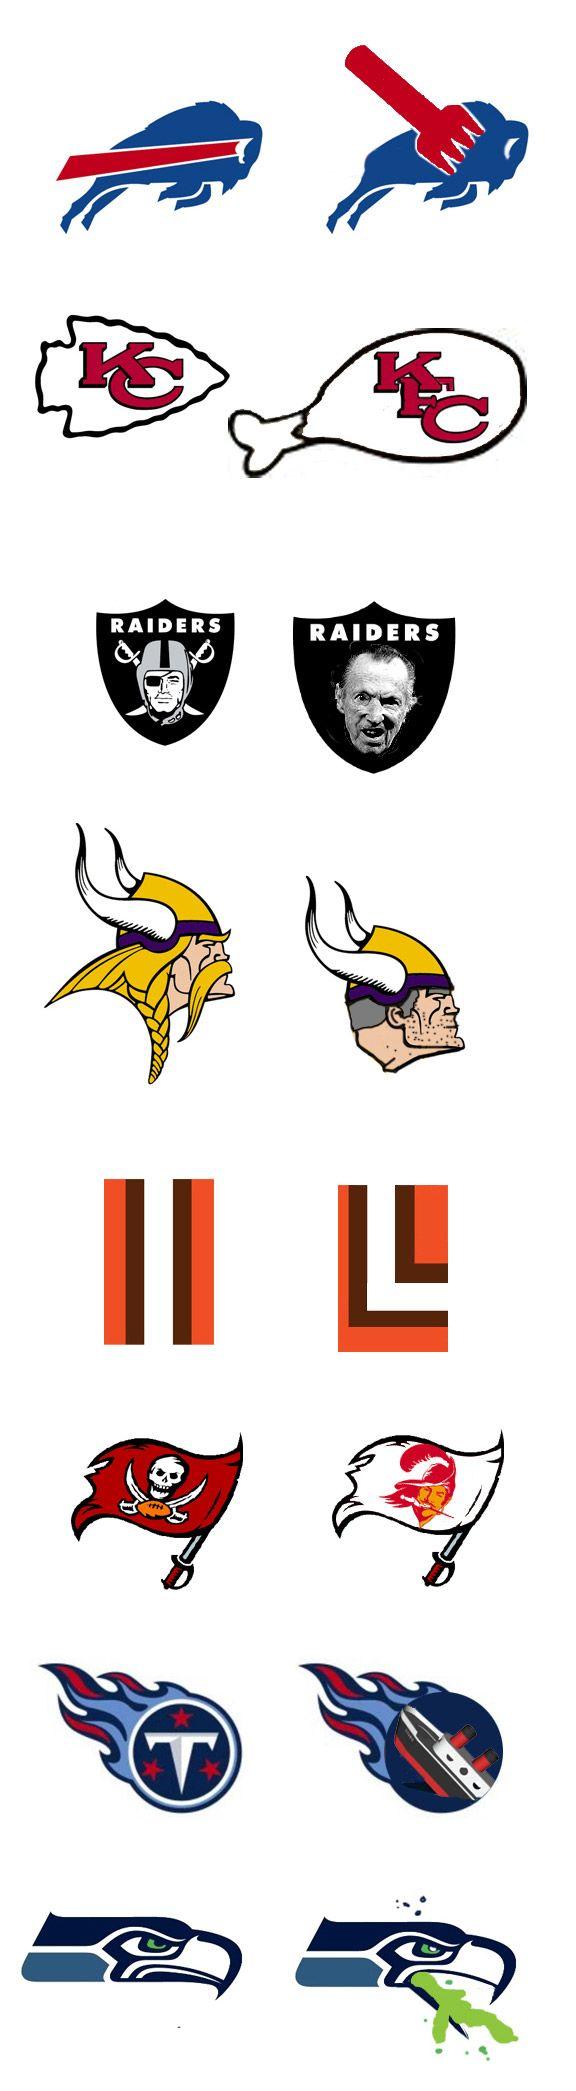 Funny NFL Logo - Snibbe: Page 2's suggested NFL logos | NFL | NFL, Football memes ...